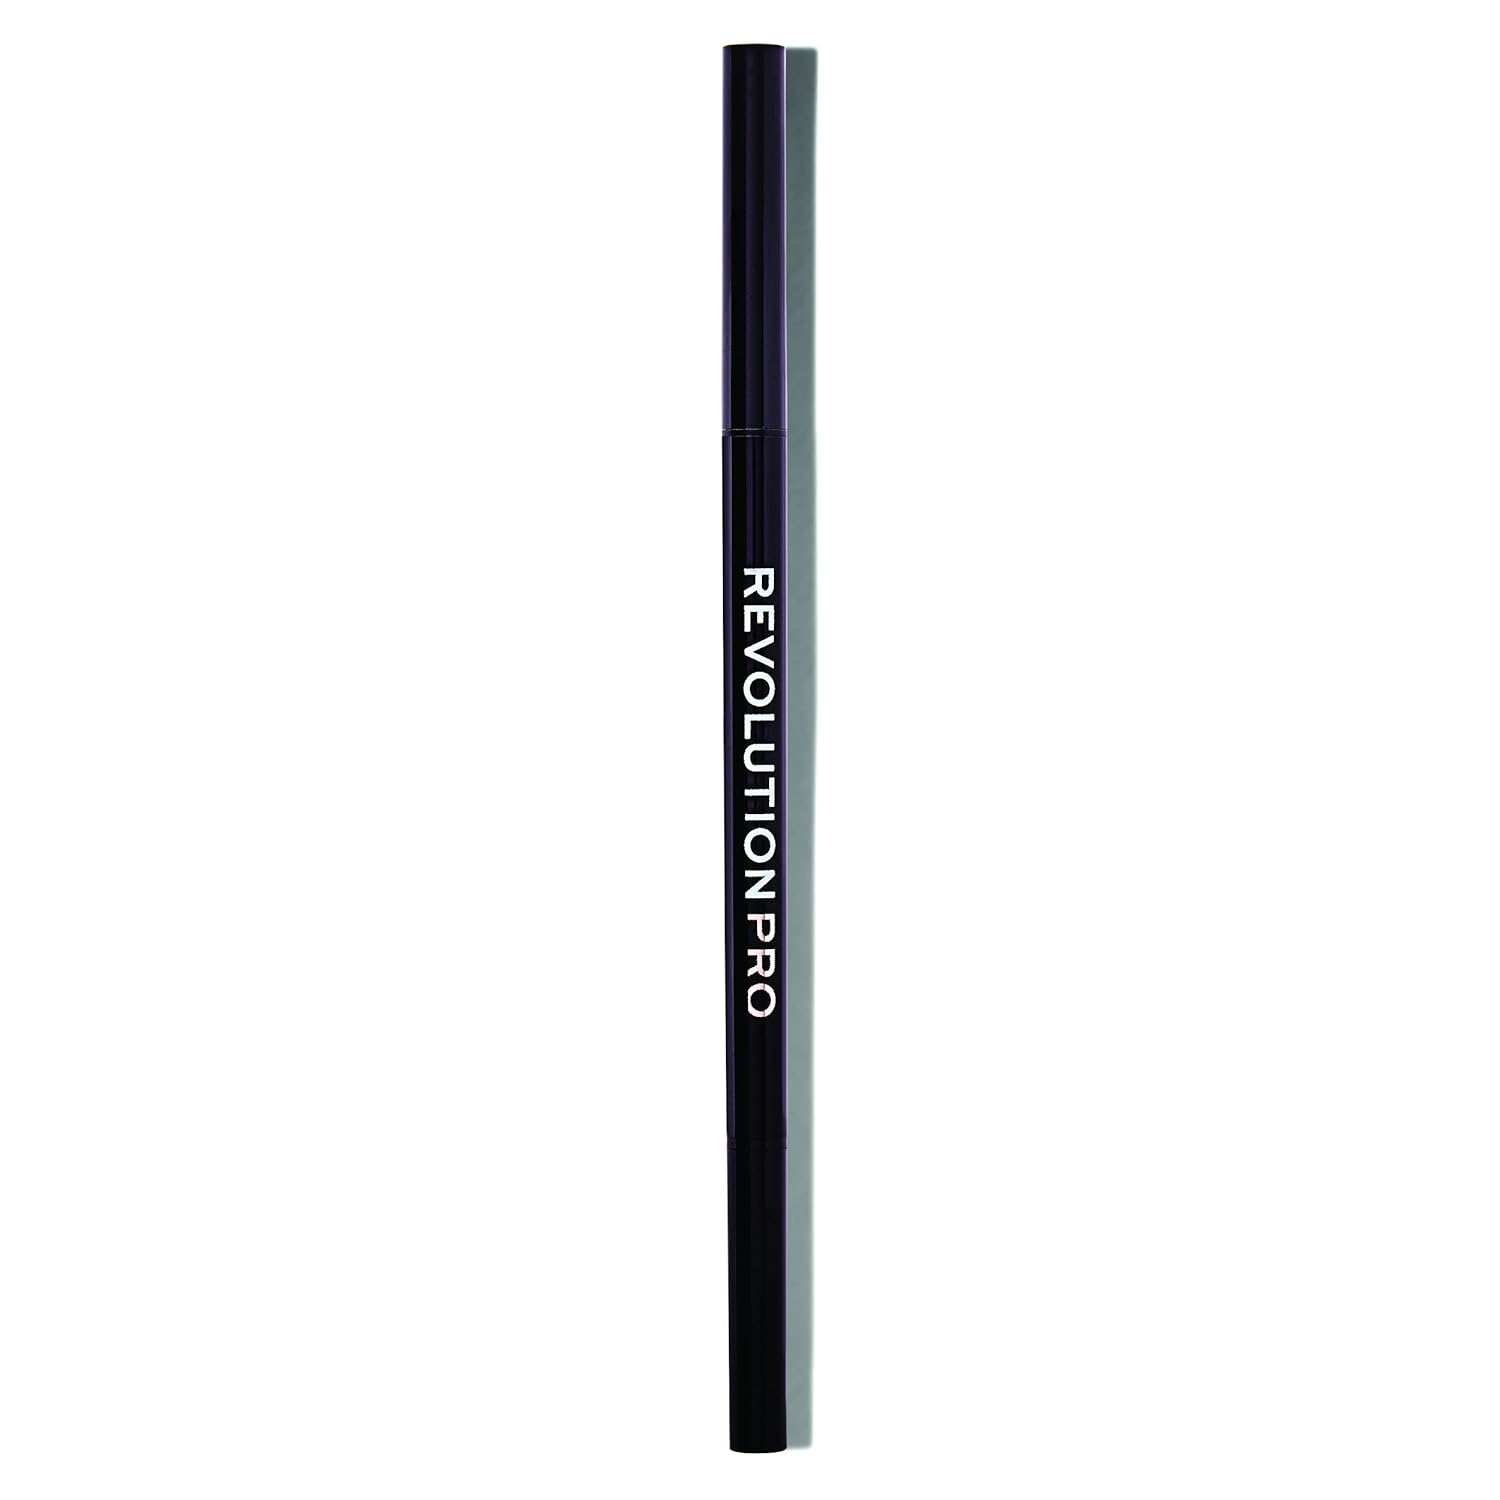 Revolution Pro Microblading Precision Eyebrow Pencil, Dual Ended Brow Pencil with Spoolie, For Dark Brunette Hair, Vegan & Cruelty-Free, Dark Brown